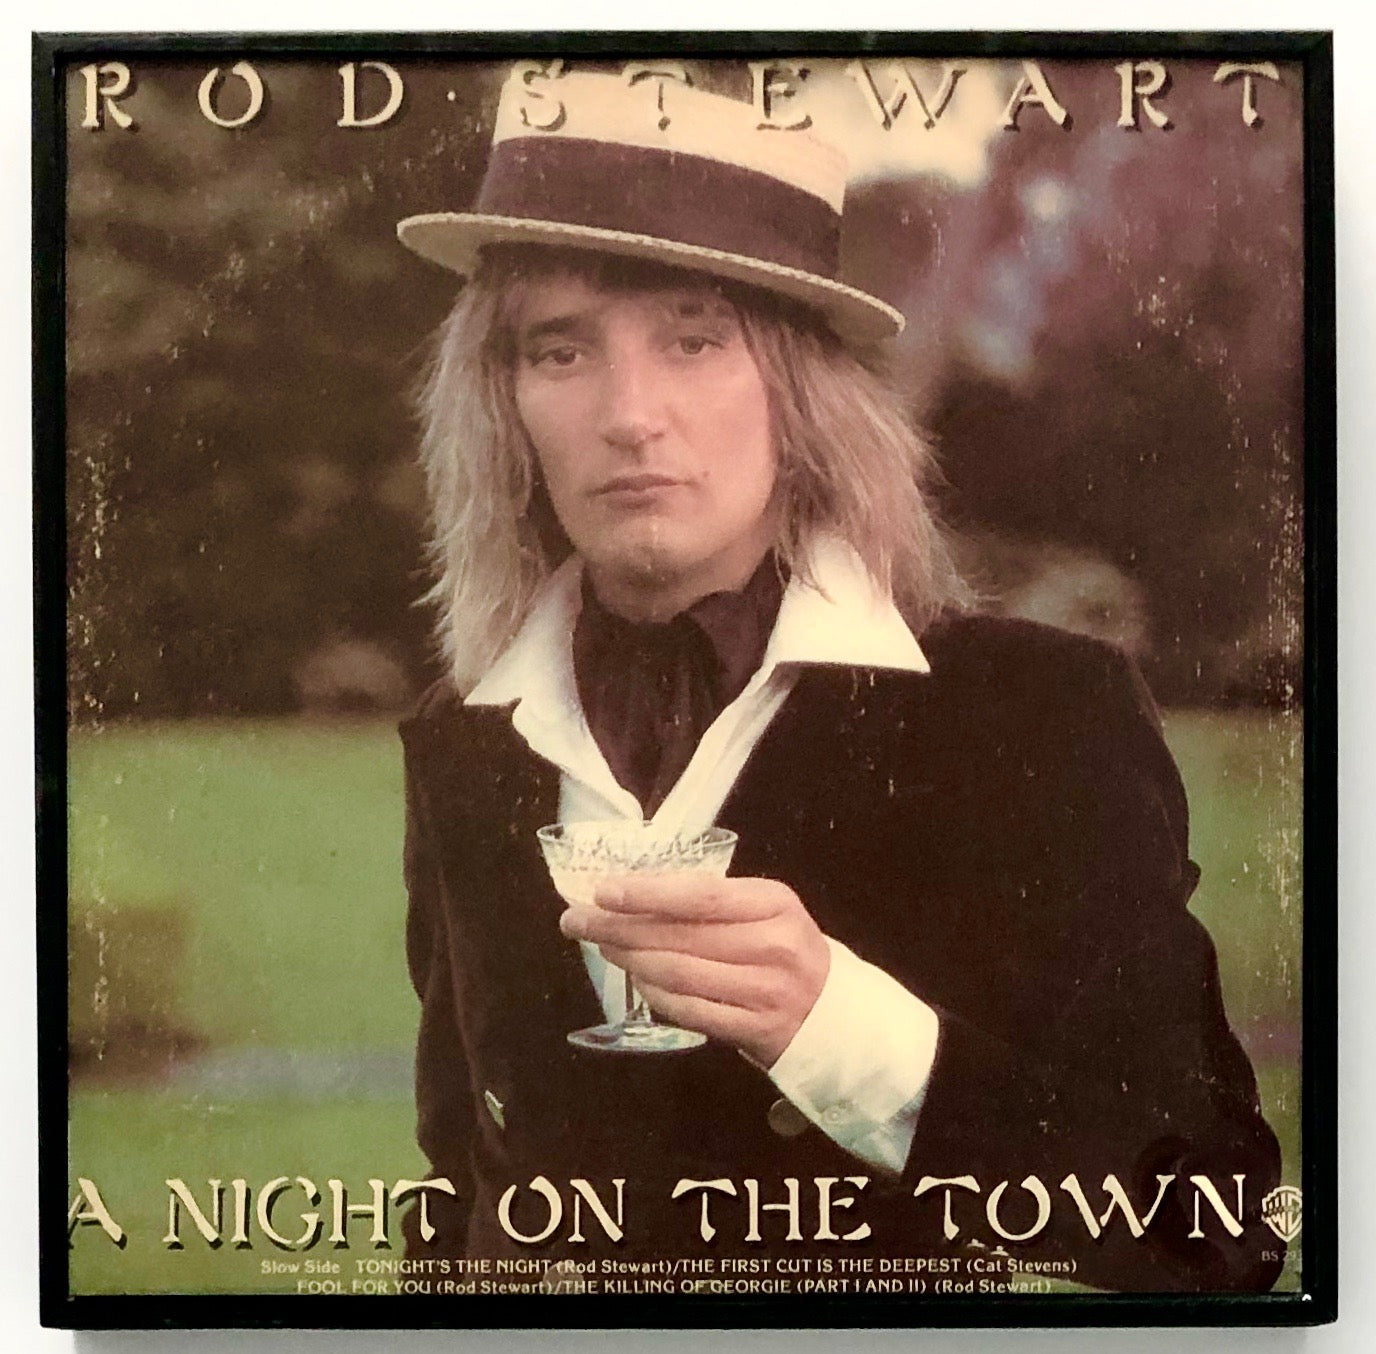 ROD STEWART - A Night on the Town